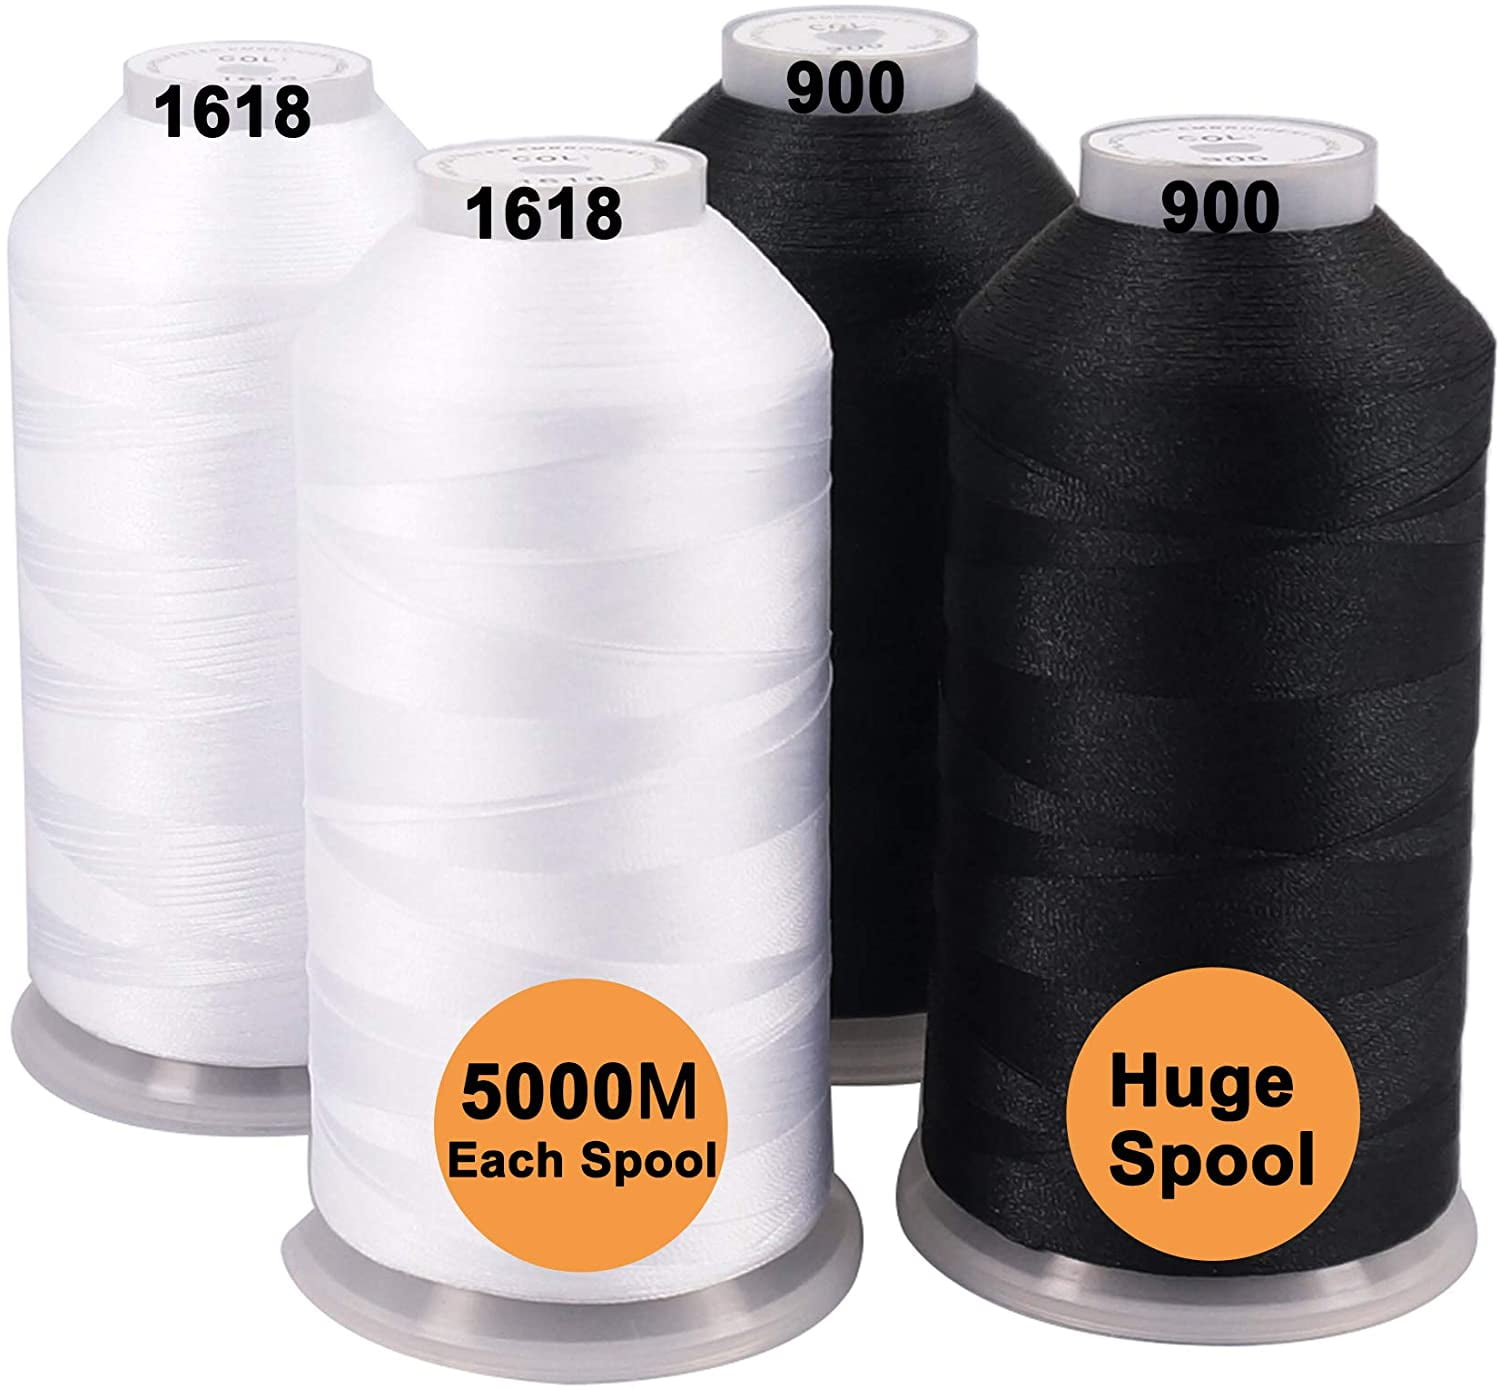 New brothread - Single Huge Spool 5000M Each Polyester Embroidery Machine  Thread 40WT for Commercial and Domestic Machines - Prussian Blue